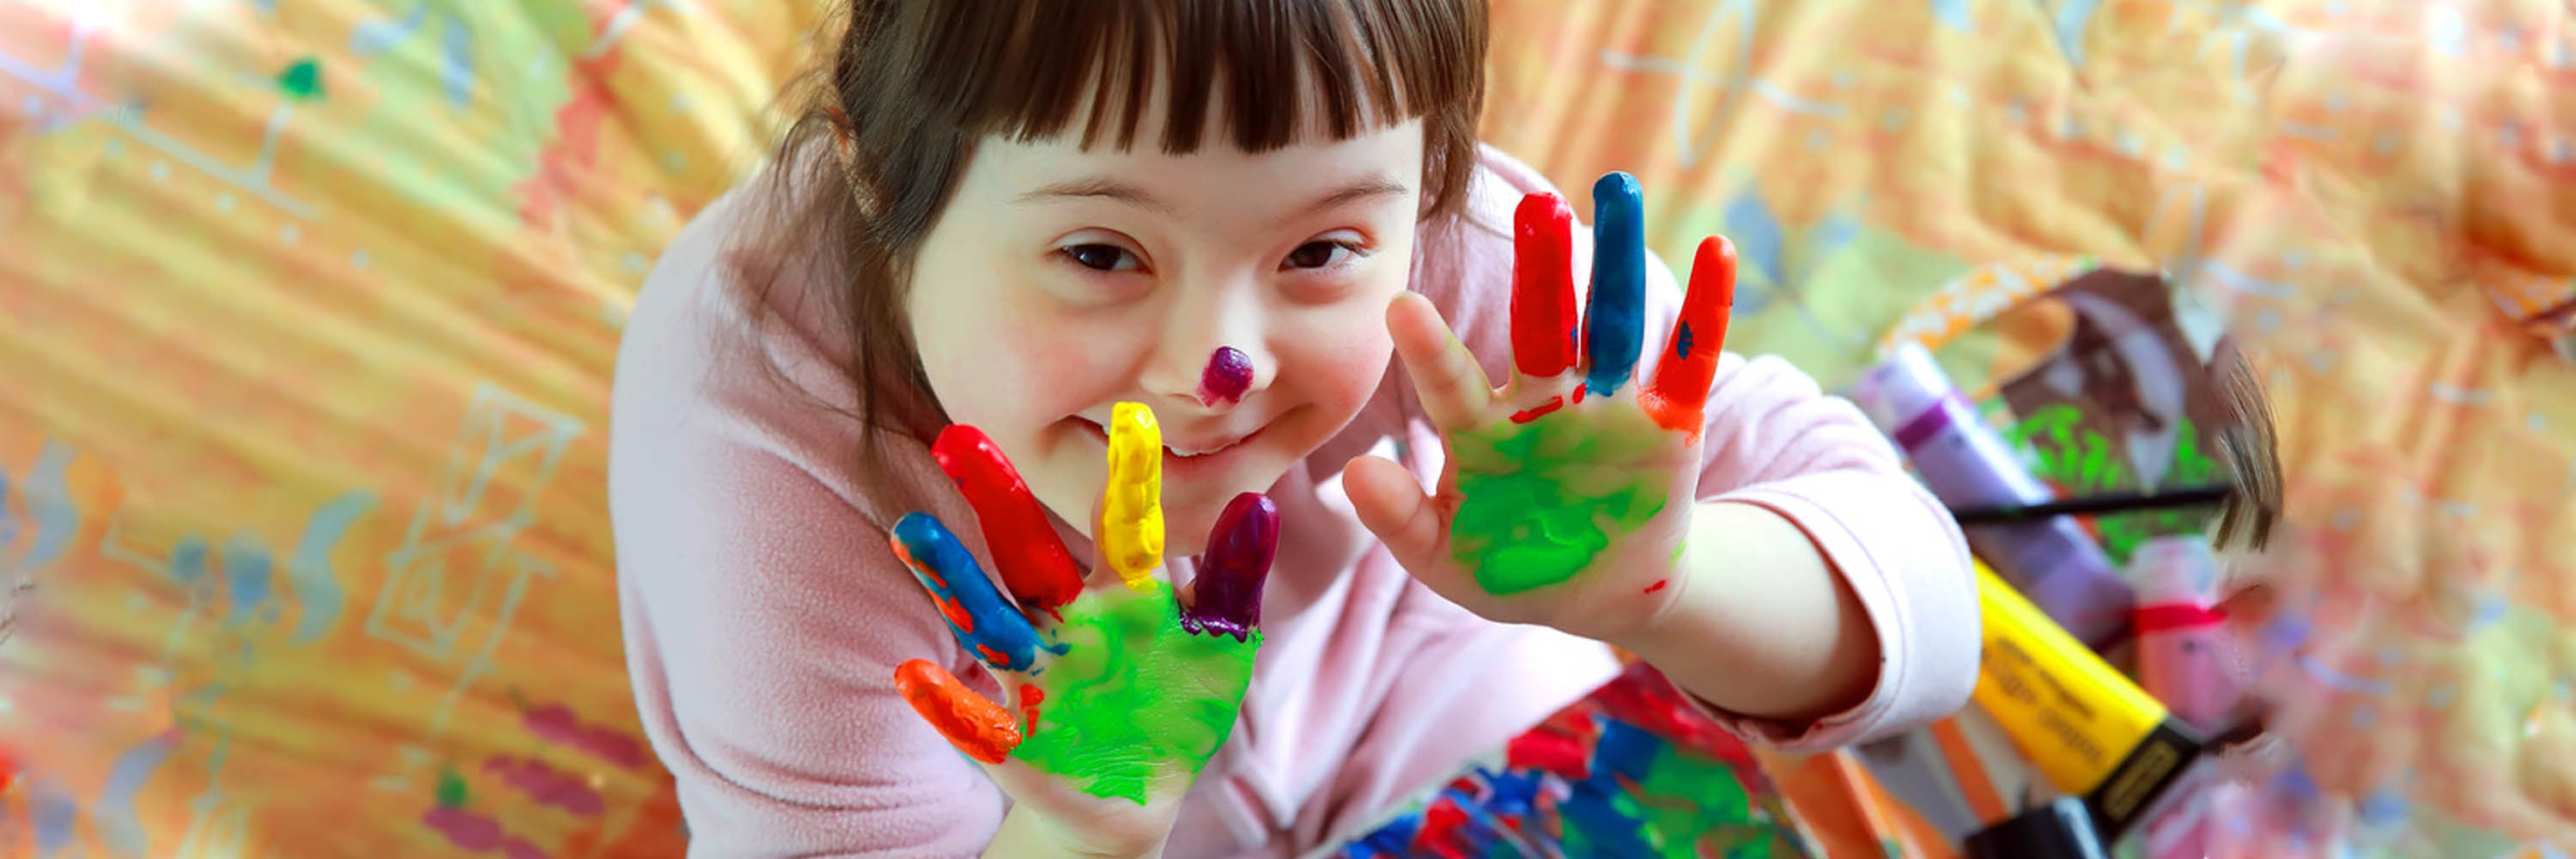 Image of a child with paint on her hands